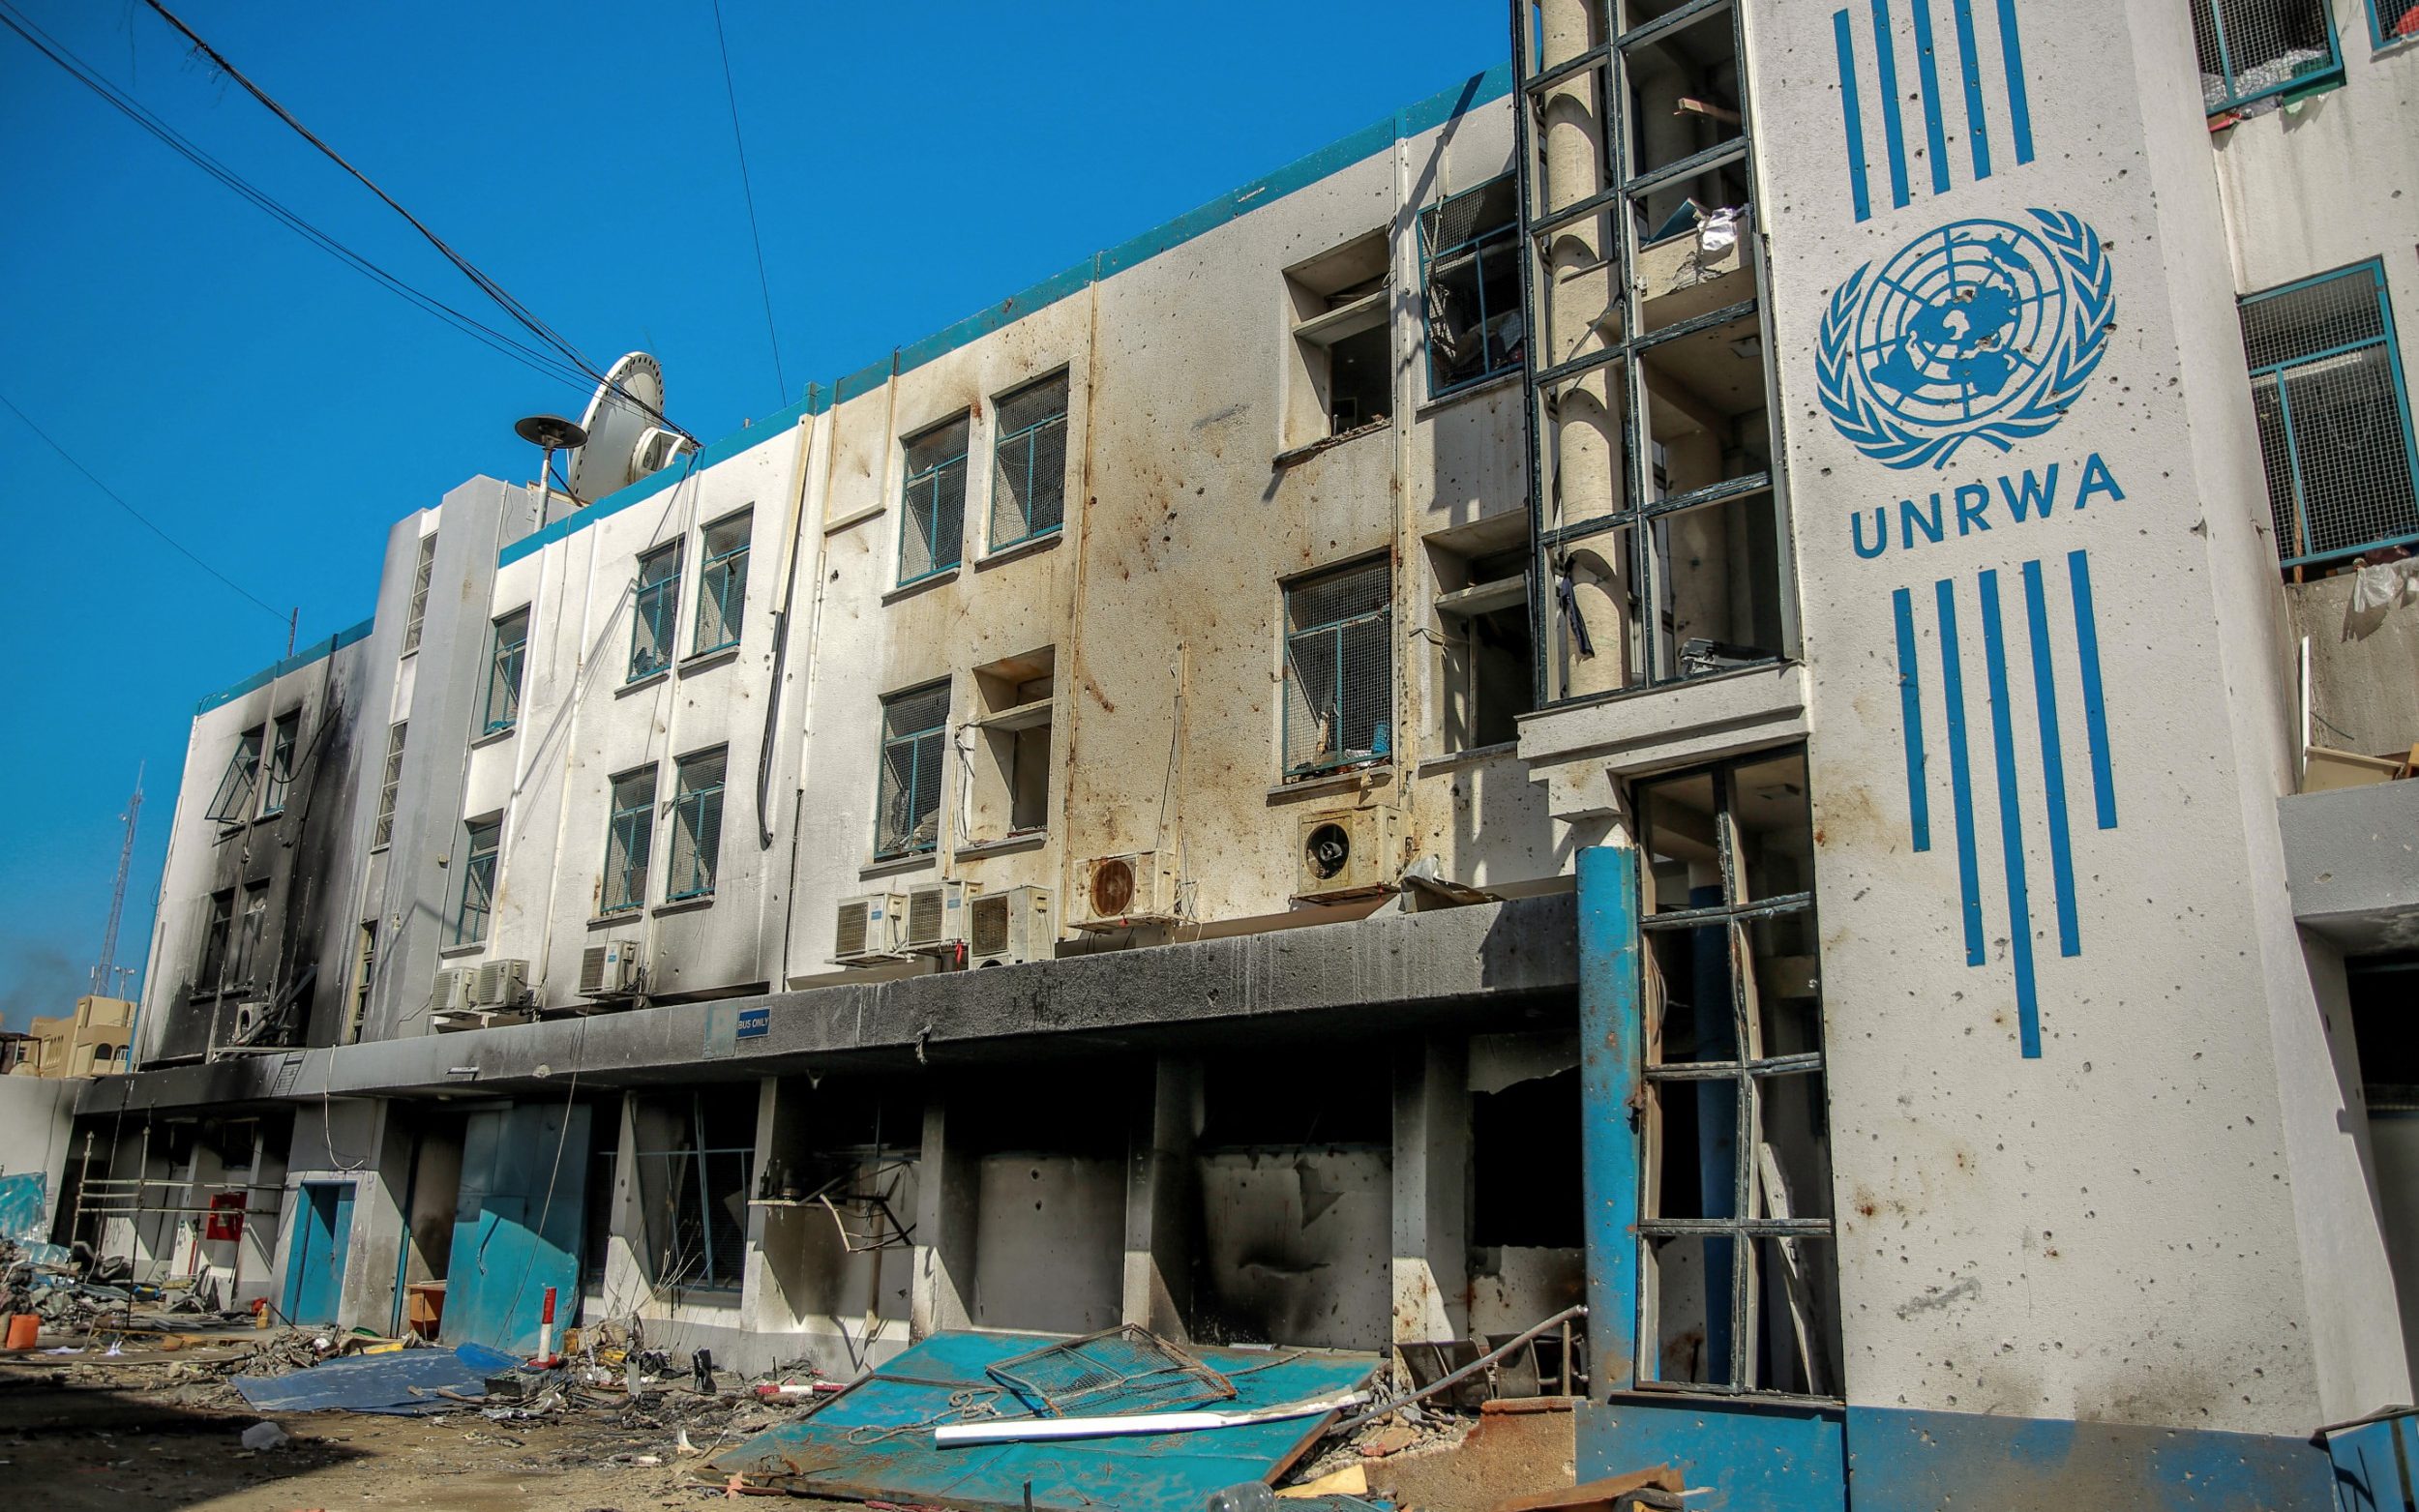 israel claims dozens more unrwa staff took part in october 7 attacks